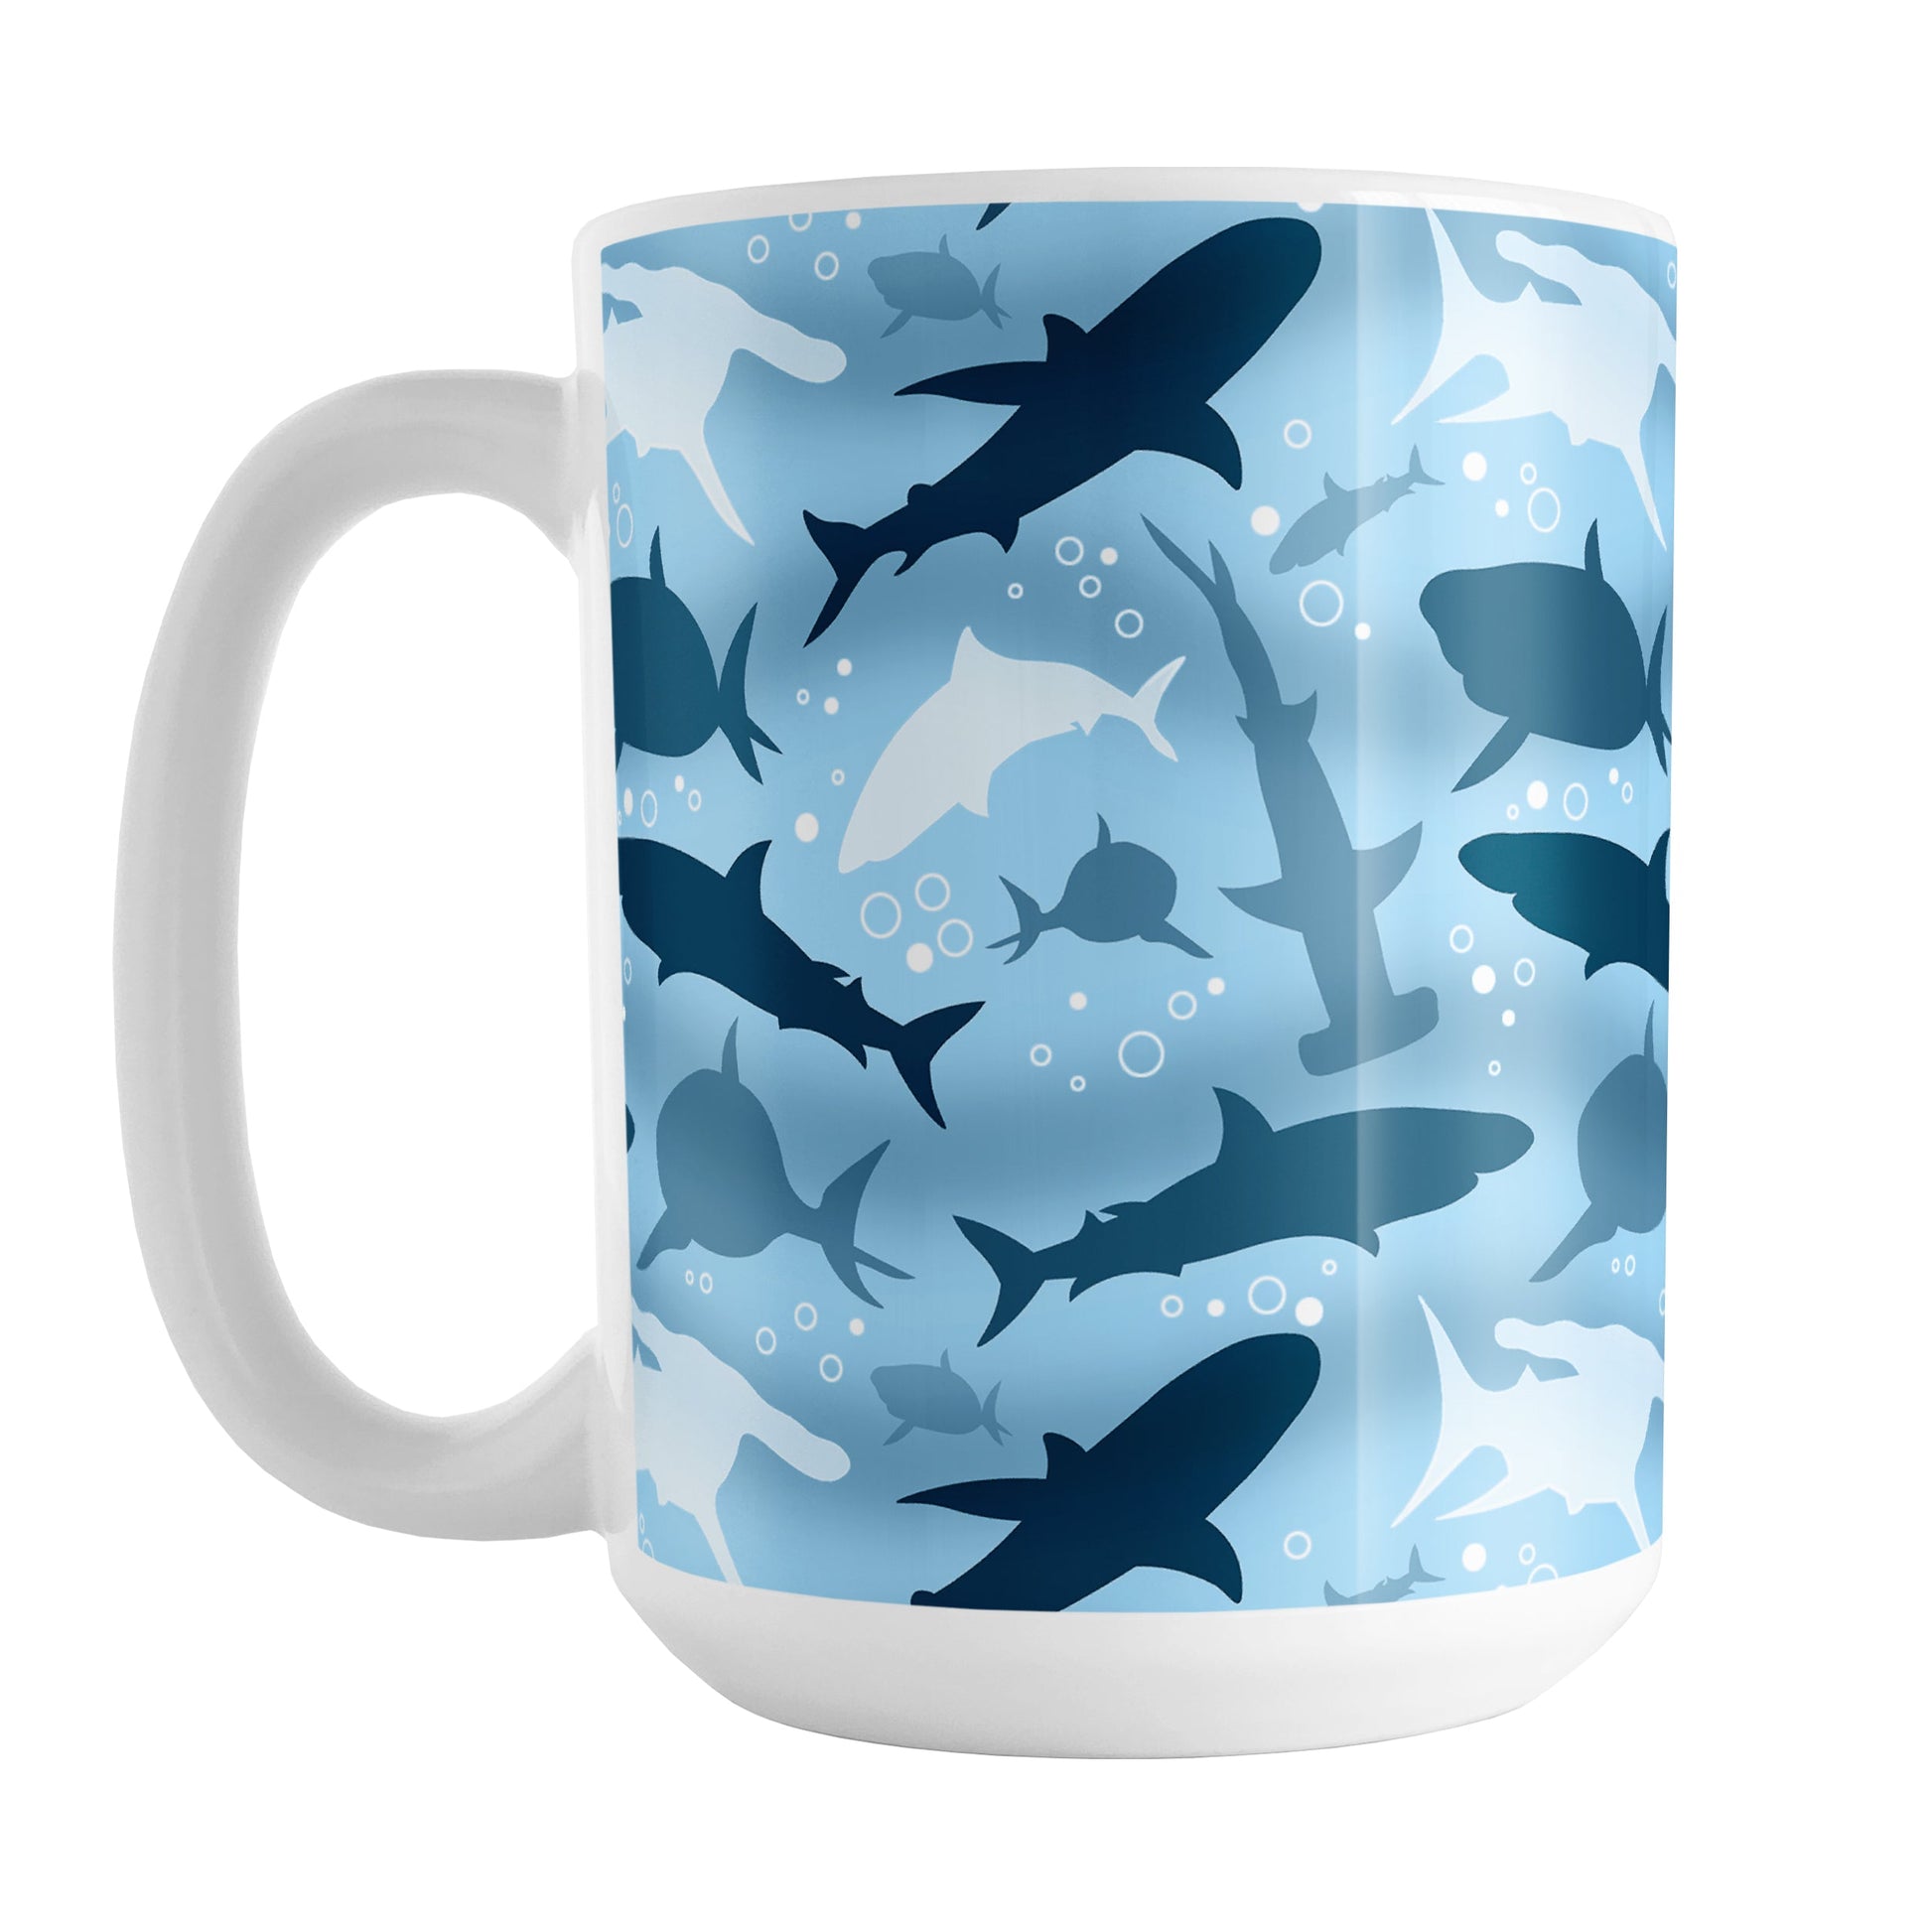 Blue Frenzy Sharks Mug (15oz) at Amy's Coffee Mugs. A ceramic coffee mug designed with a pattern of sharks in different shades of blue, in a frenzy deep beneath the water, that wraps around the mug to the handle.